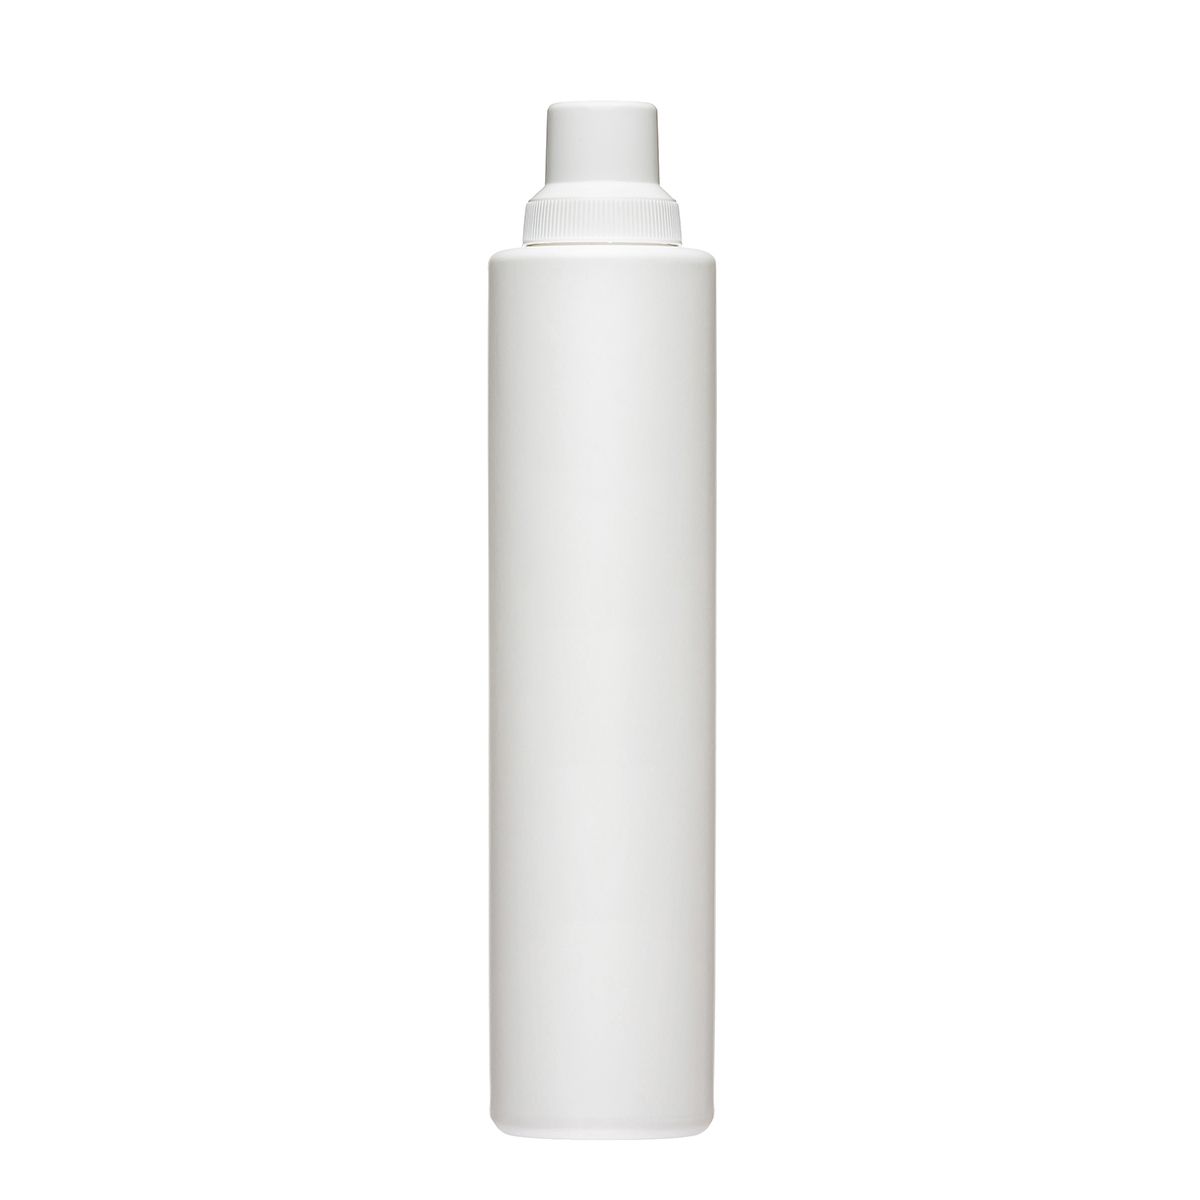 The 750 ml HDPE bottle Dufa 750 with measurin cap is perfect choice for any product in household chemicals. by Pack Store Europe, packstore.eu